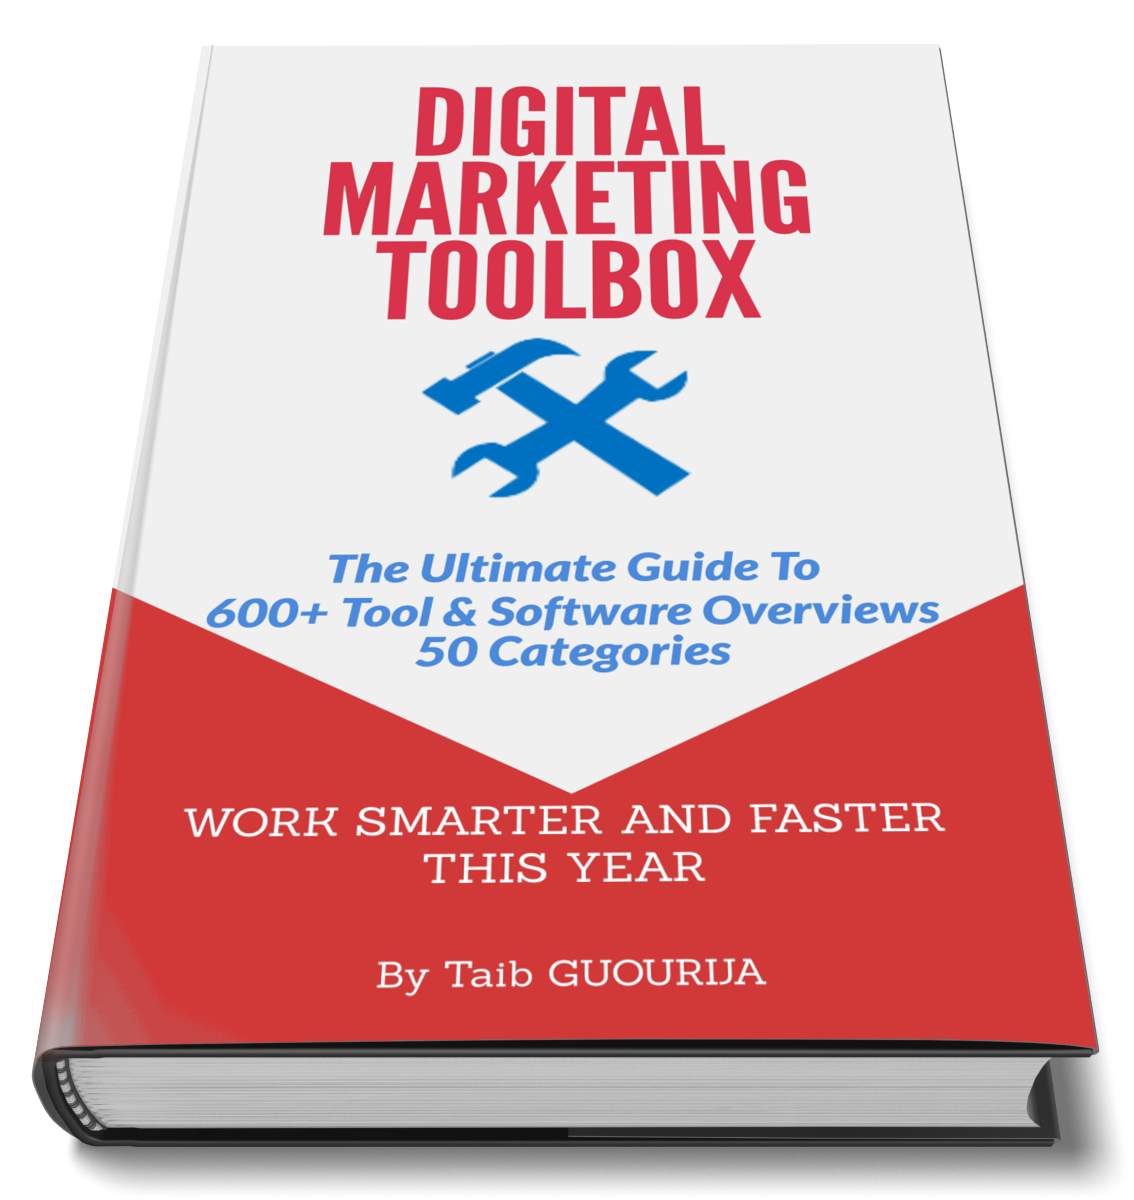 Digital Marketing Toolbox - The Ultimate Guide To
600+ Tool &amp; Software Overviews
50 Categories

 

/ WORK SMARTER AND FASTER
THIS YEAR

| By Taib GUOURDA